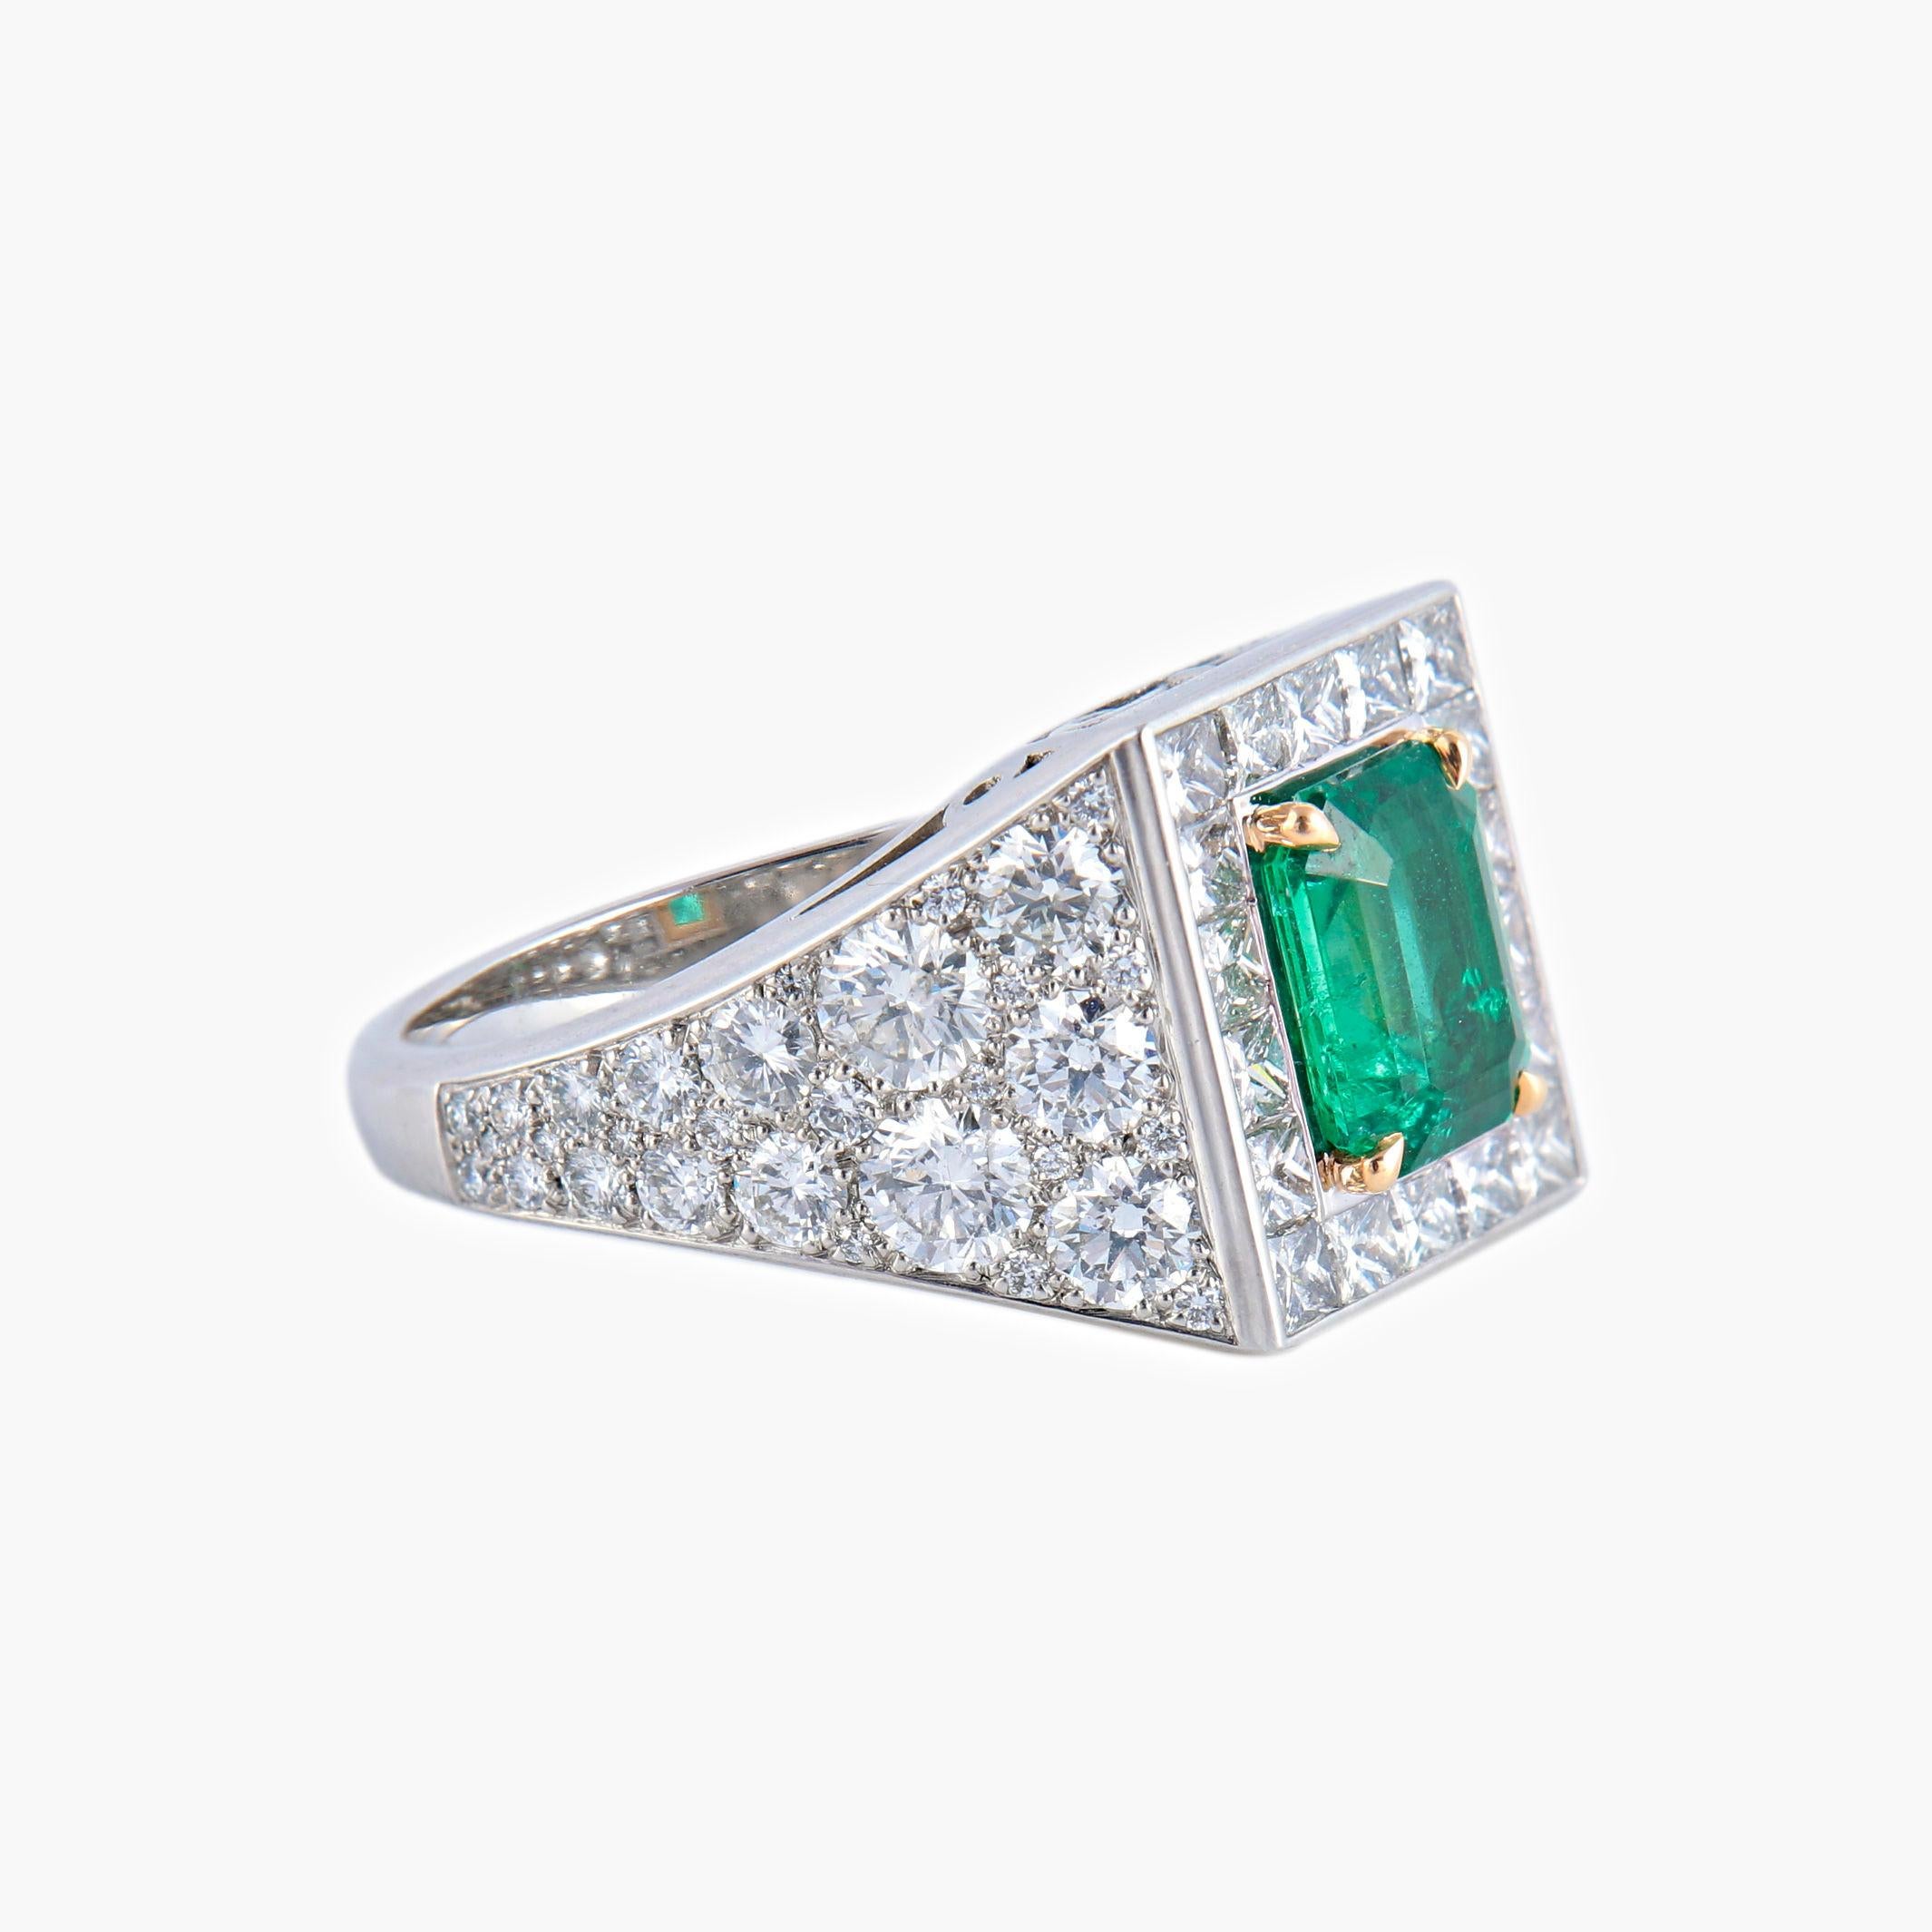 . Platinum and yellow gold ring decorated in its center with a 1.80 carat emerald

. Surrounded by princess-cut diamonds and the body of the ring paved with brilliant-cut diamonds.

. Finger size: 52

. Gross weight: 8.80 grams